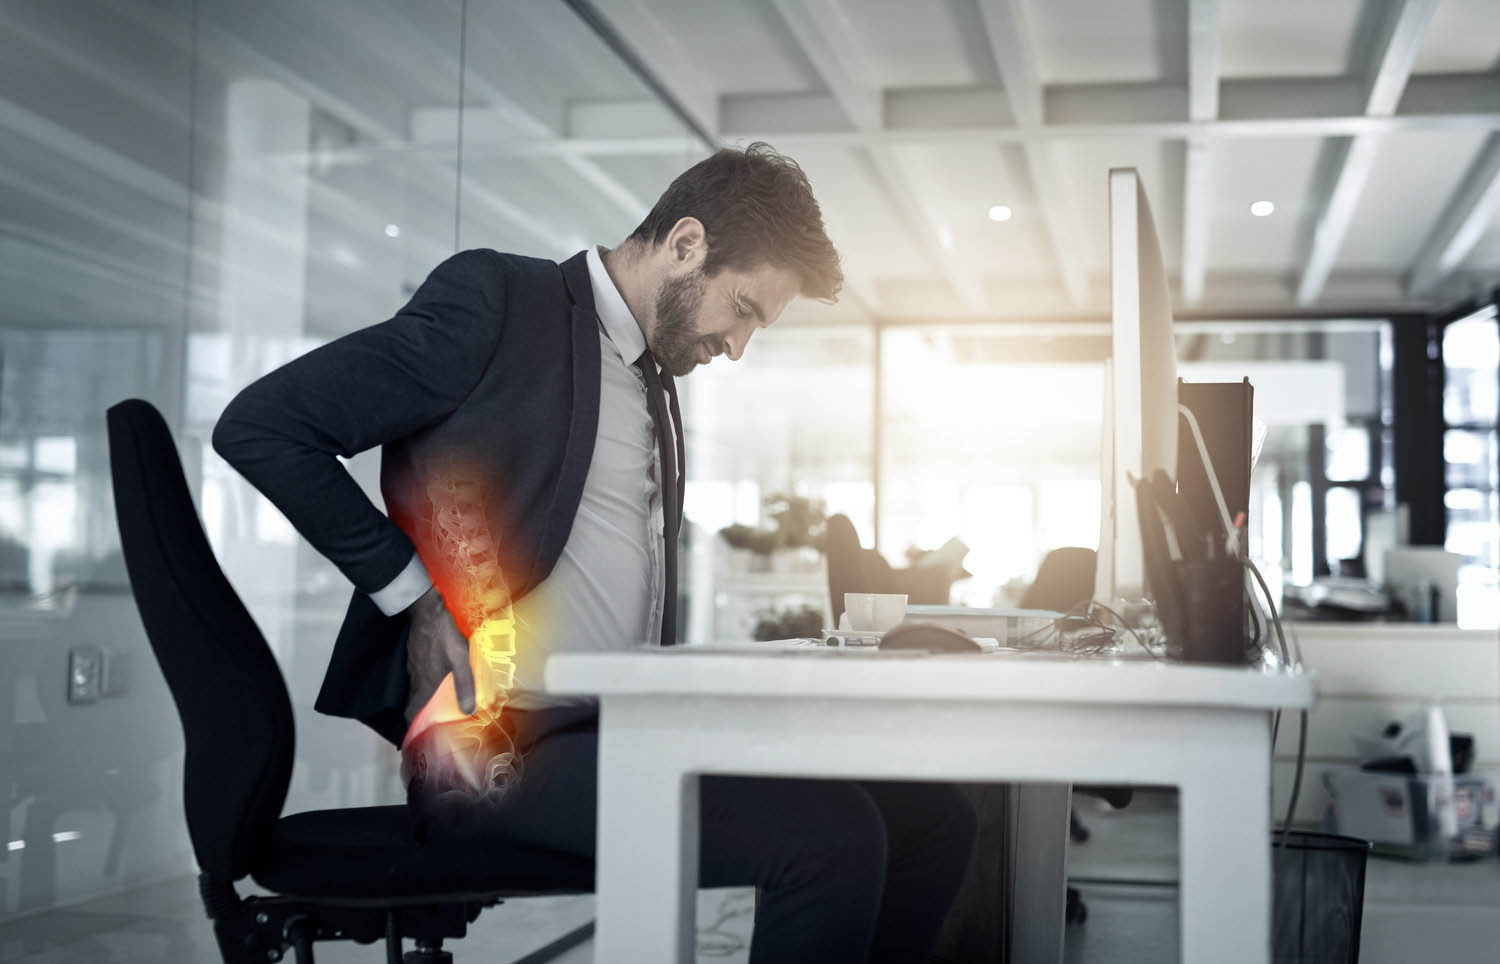 Most people spend 80% of their day at work, which means they are doing some kind of repetitive activity leading to tightness, pain, spasm and tendinitis.